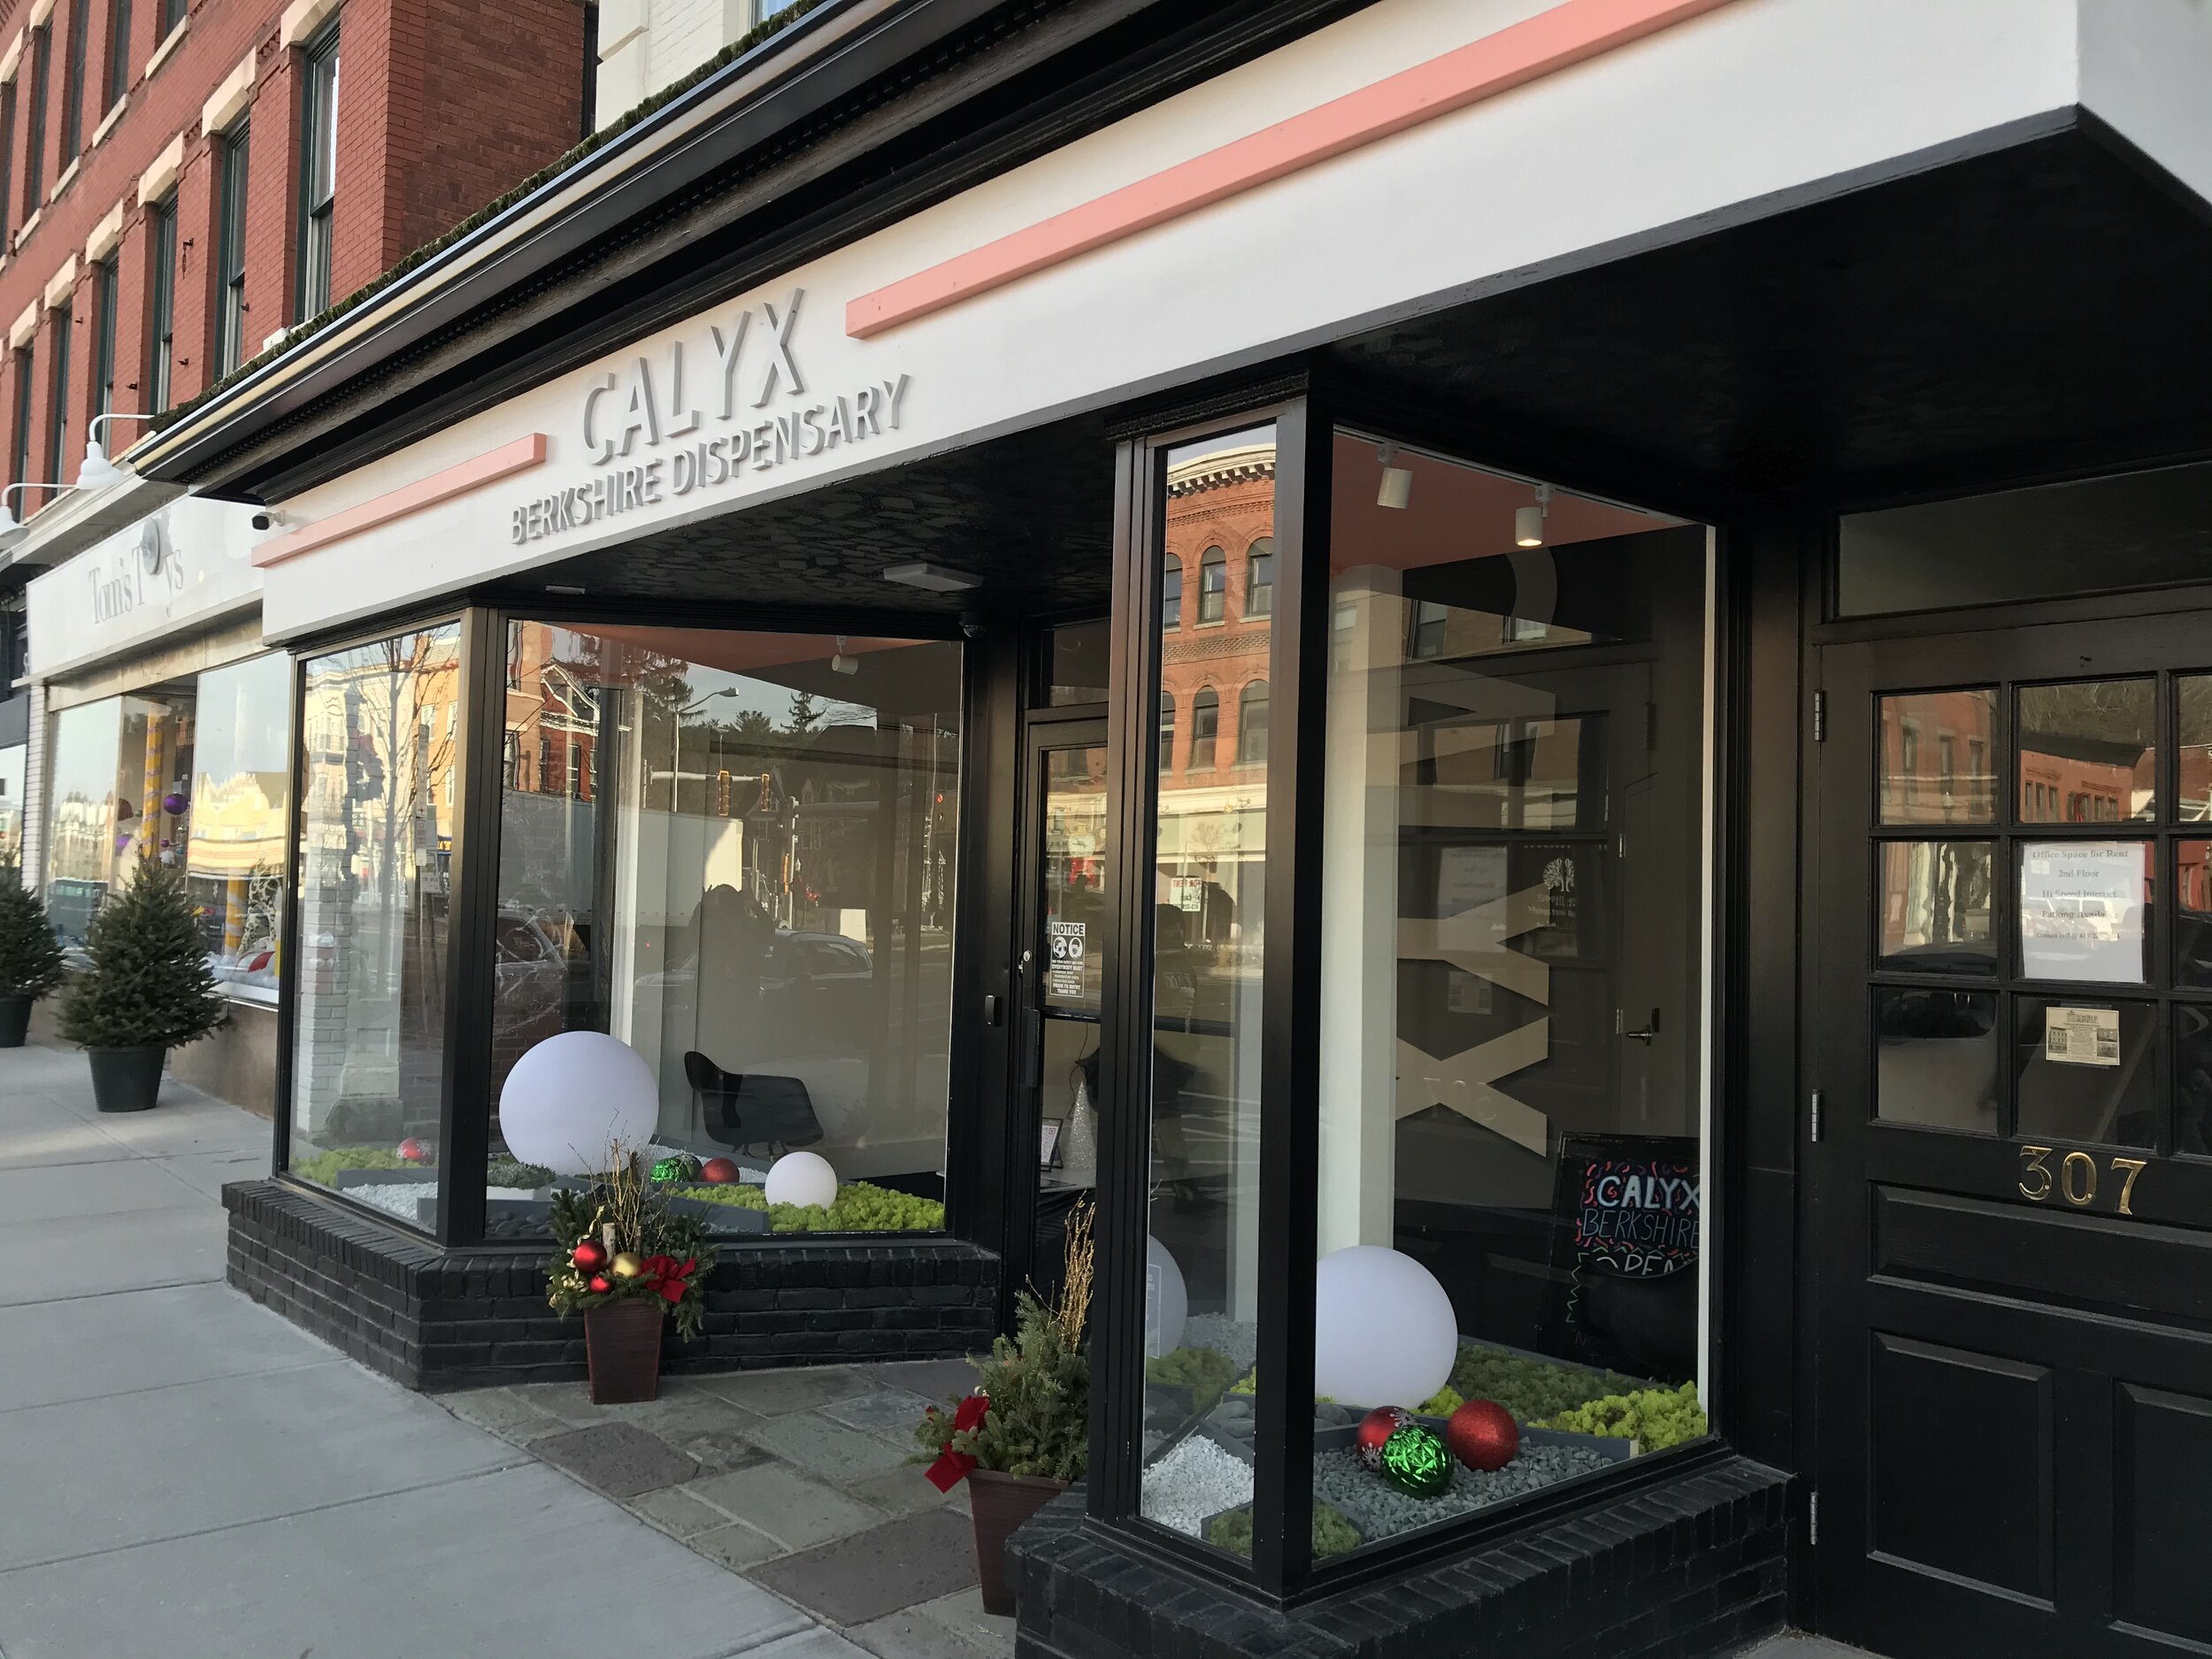 About — Calyx Berkshire Dispensary